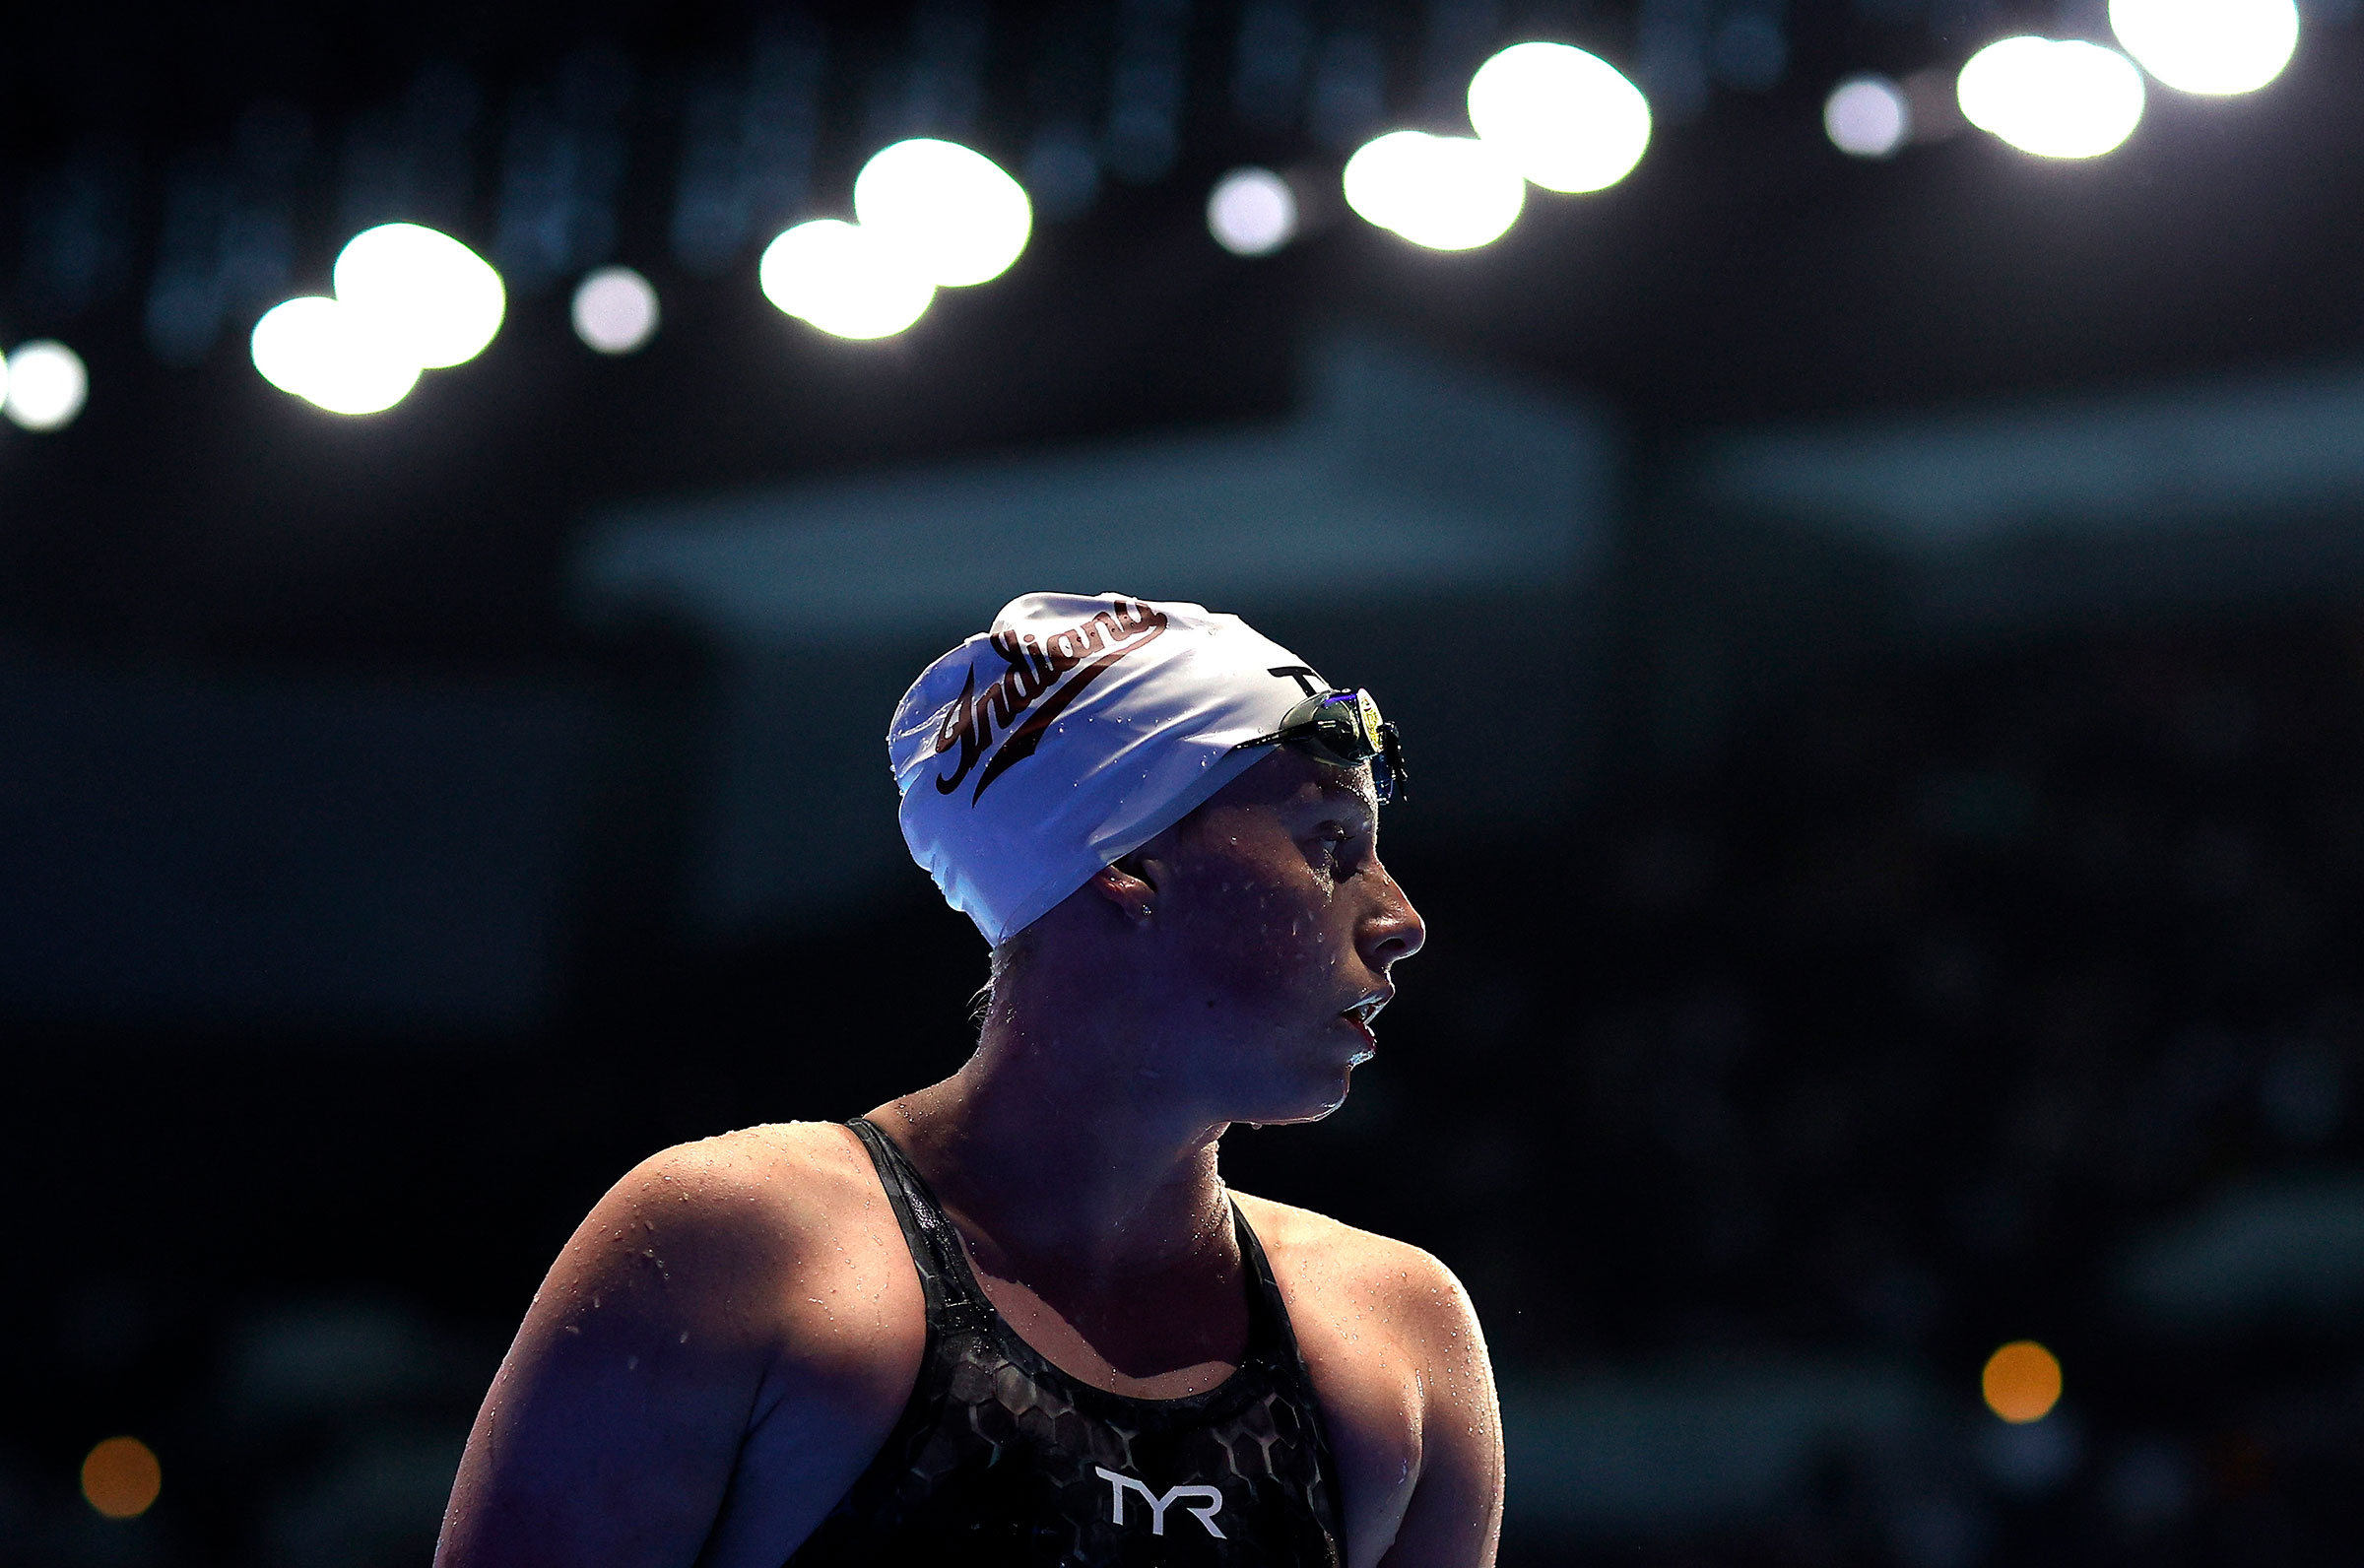 Lilly King of the United States after competing in a semifinal heat for the Women's 200m breaststroke at the Olympic Team Swimming Trials on June 17, 2021 in Omaha, Nebraska. (Maddie Meyer—Getty Images)